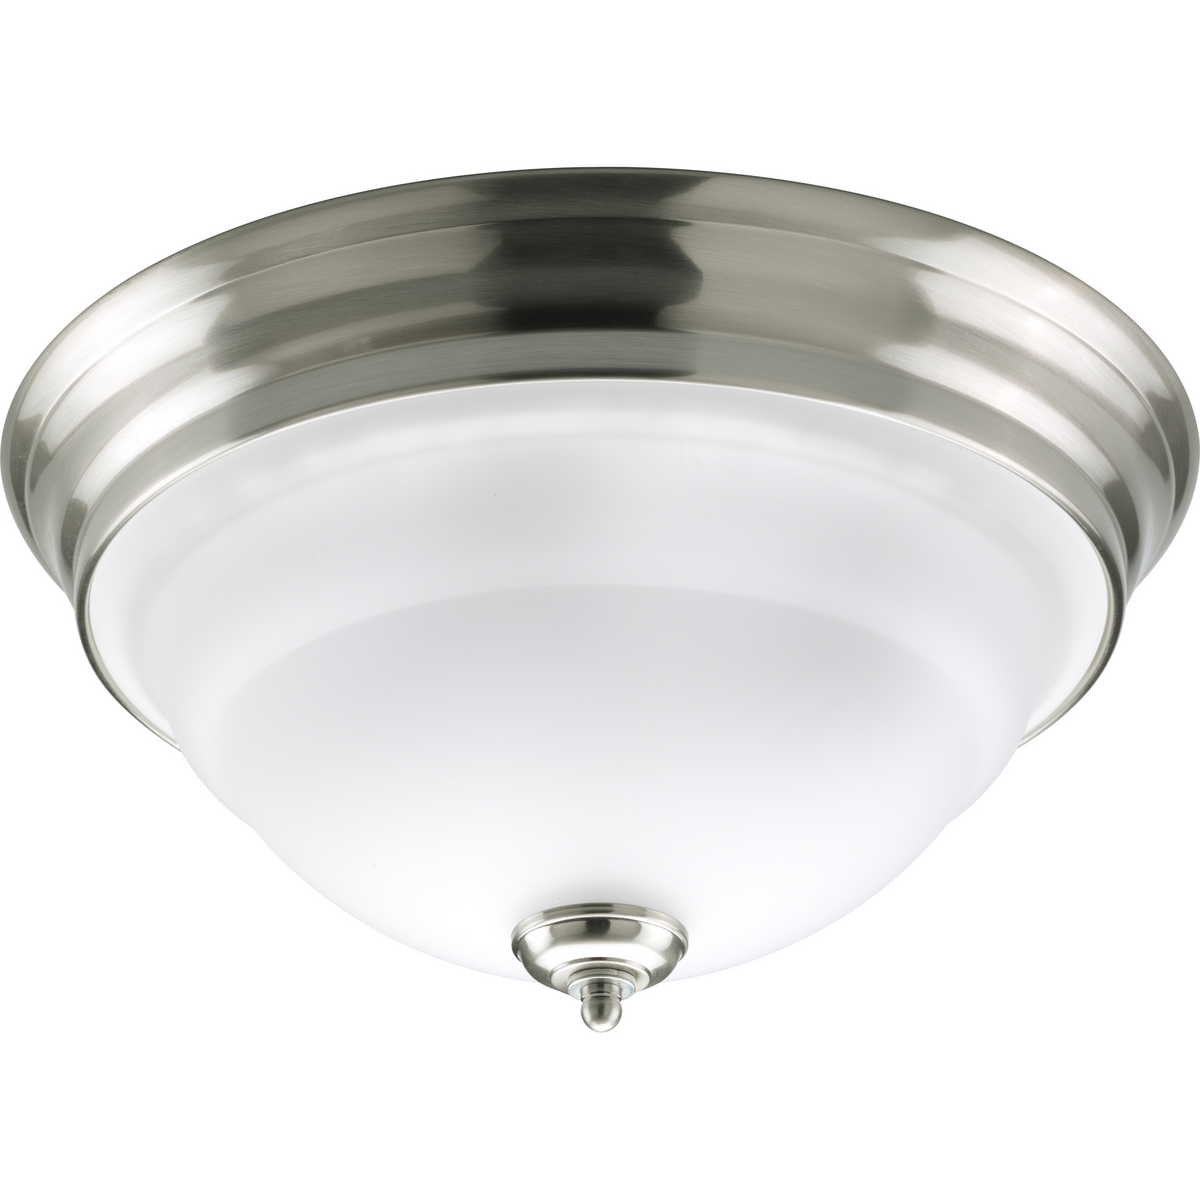 Two-light close-to-ceiling fixture with an etched white oversized, bell-shaped glass bowl. Brushed Nickel finish.